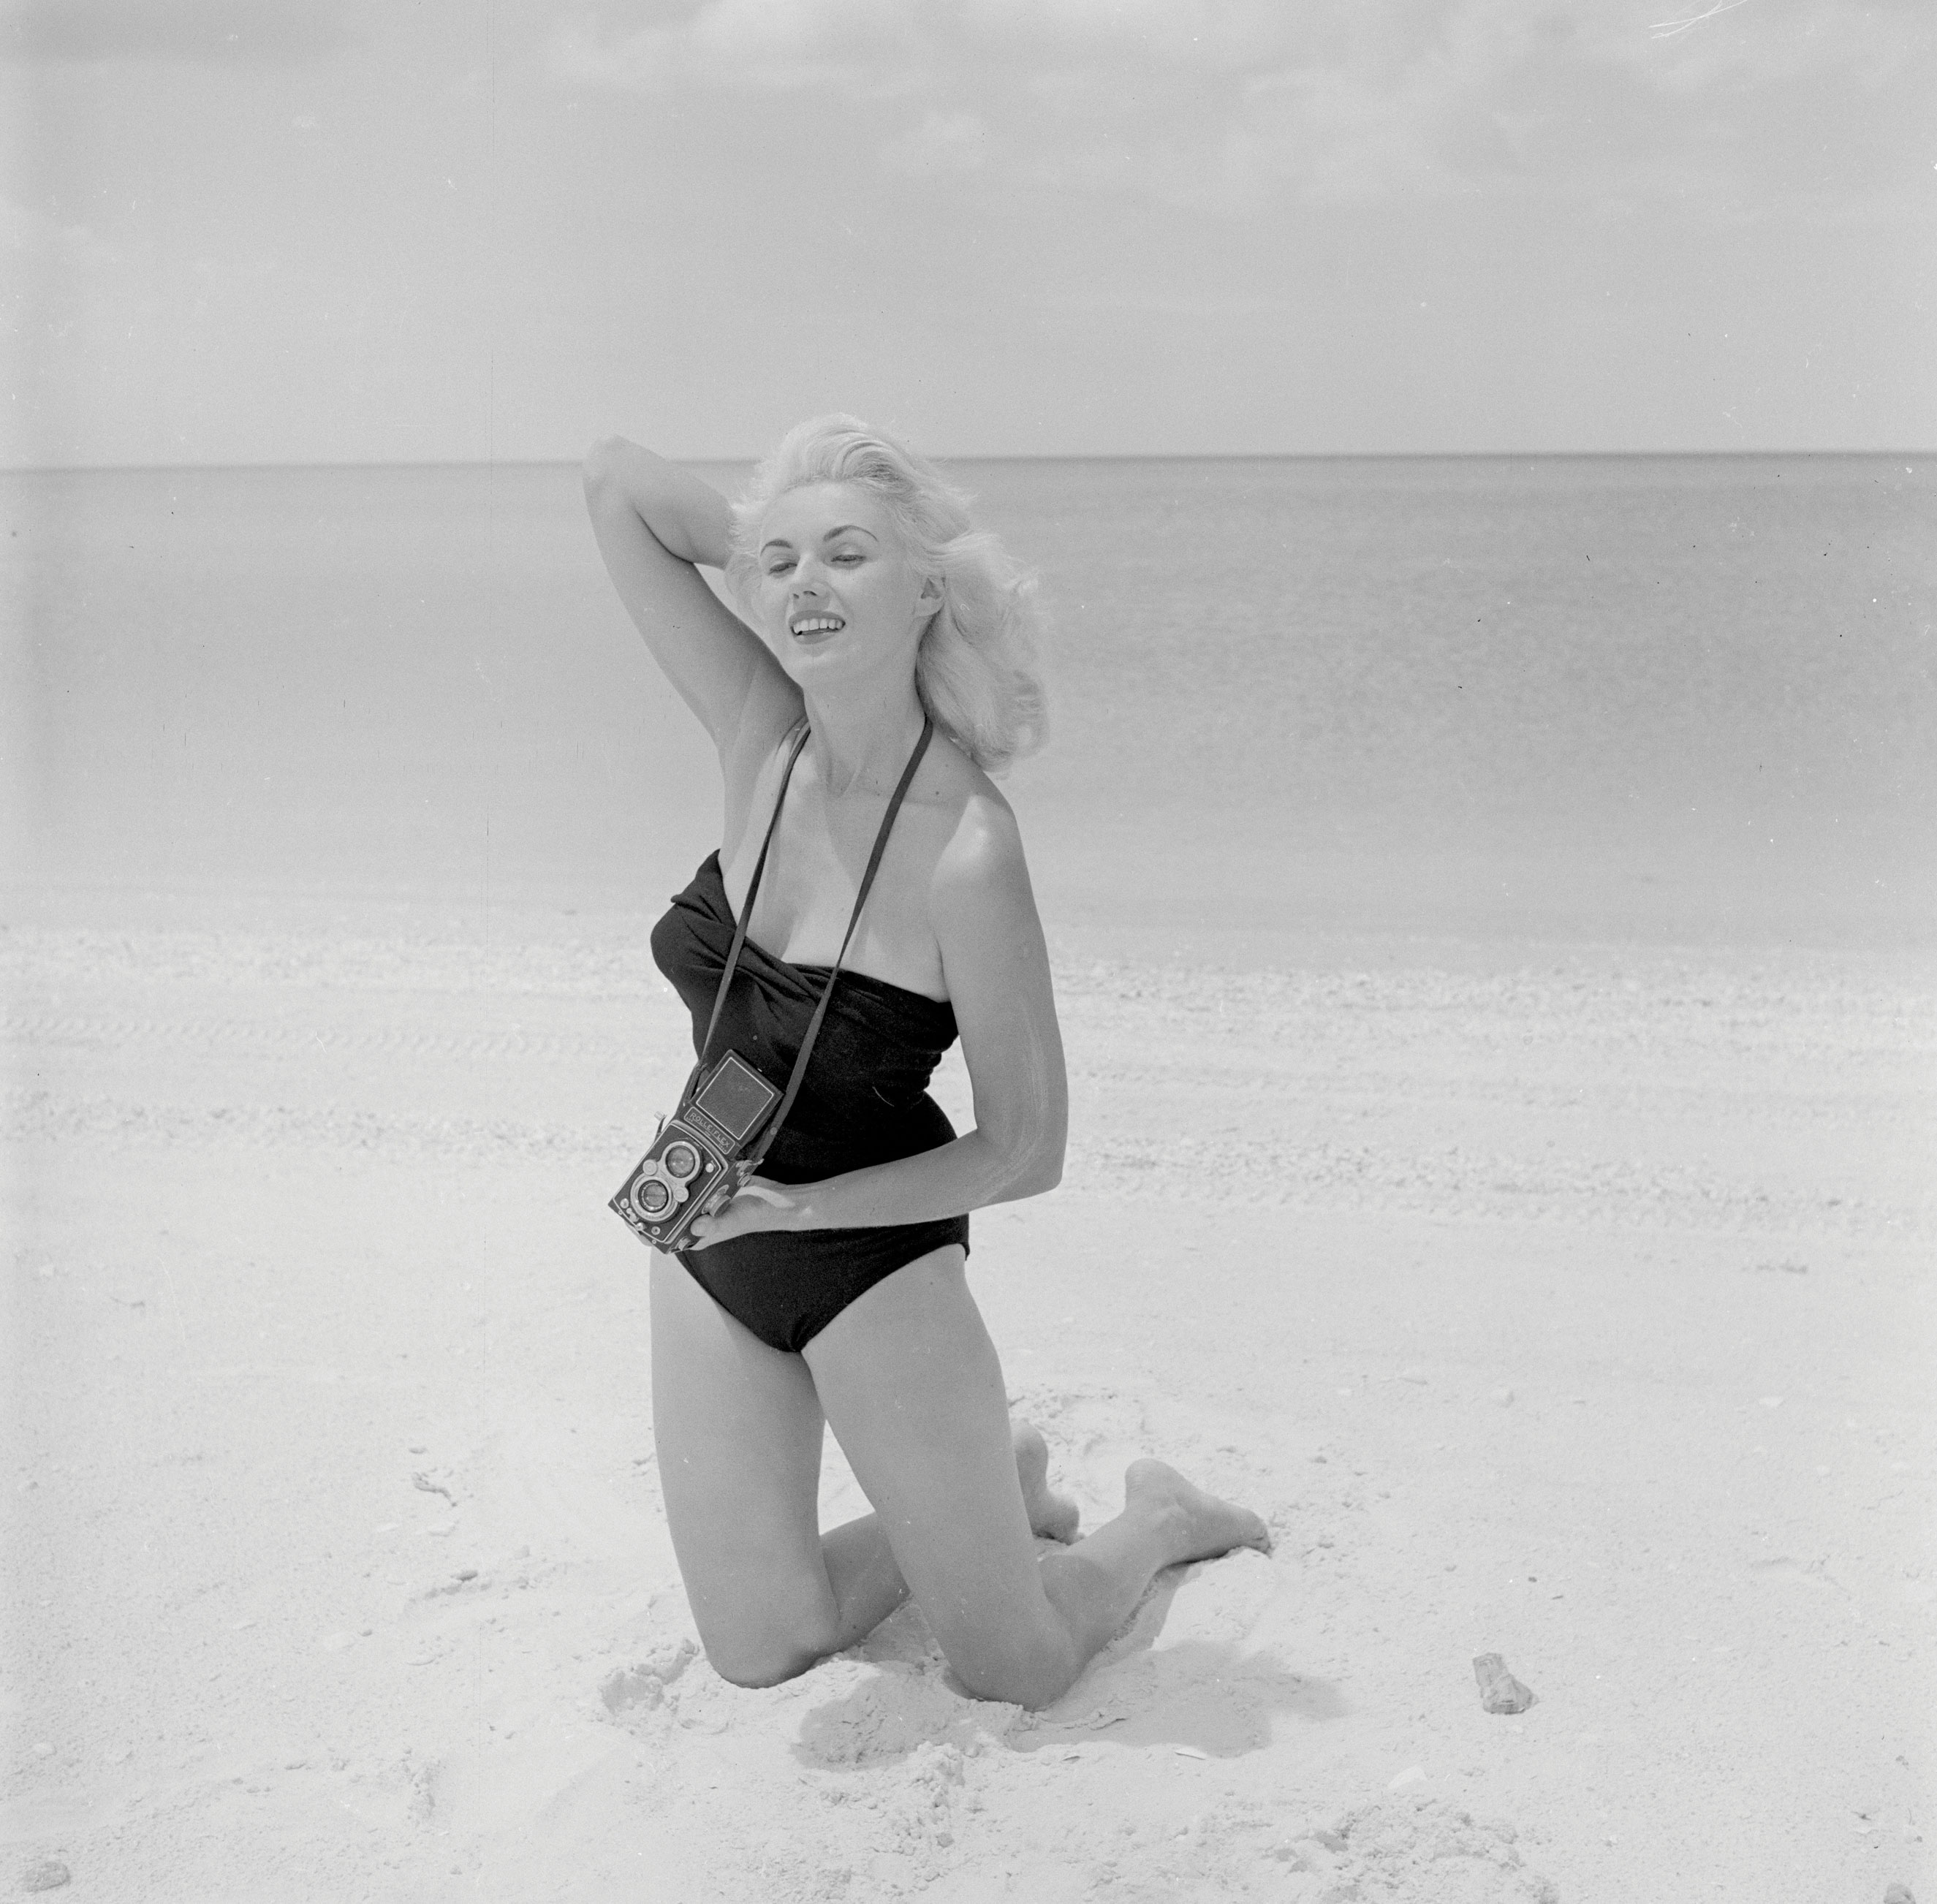 Self-portrait, Naples, Fla., in 1960 (Bunny Yeager—Courtesy of Rizzoli)